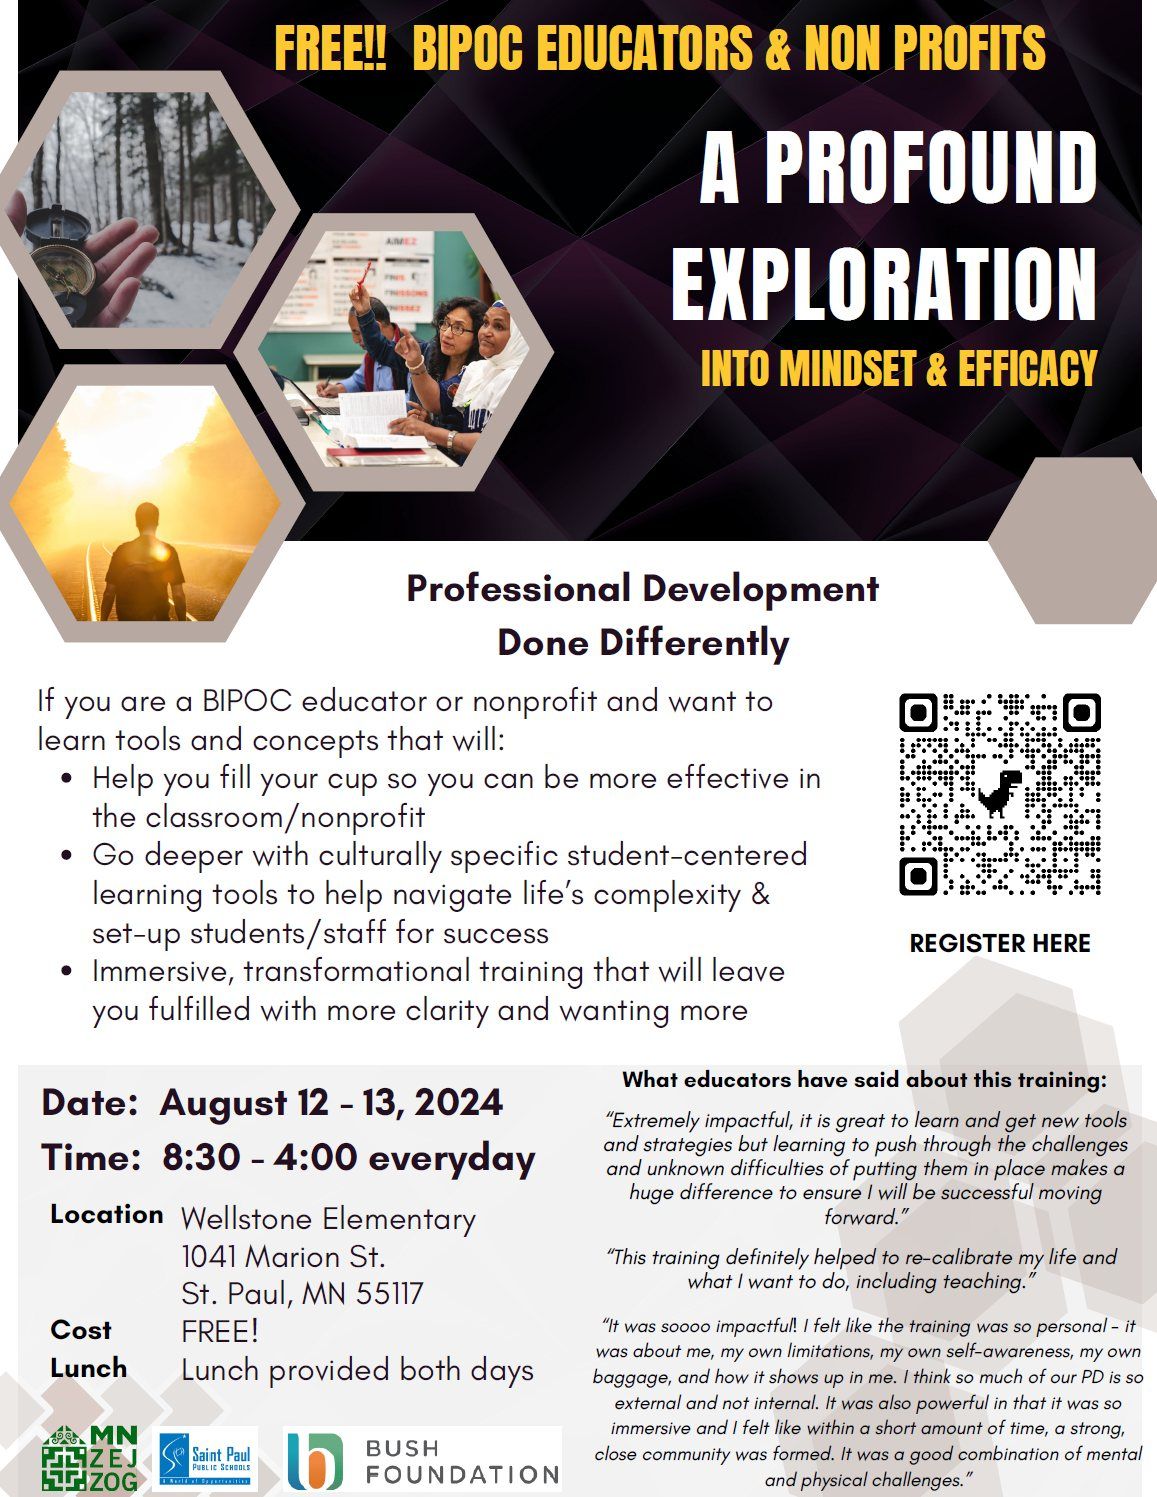 A Profound Exploration Into Mindset and Efficacy: BIPOC Educators and Non-Profits